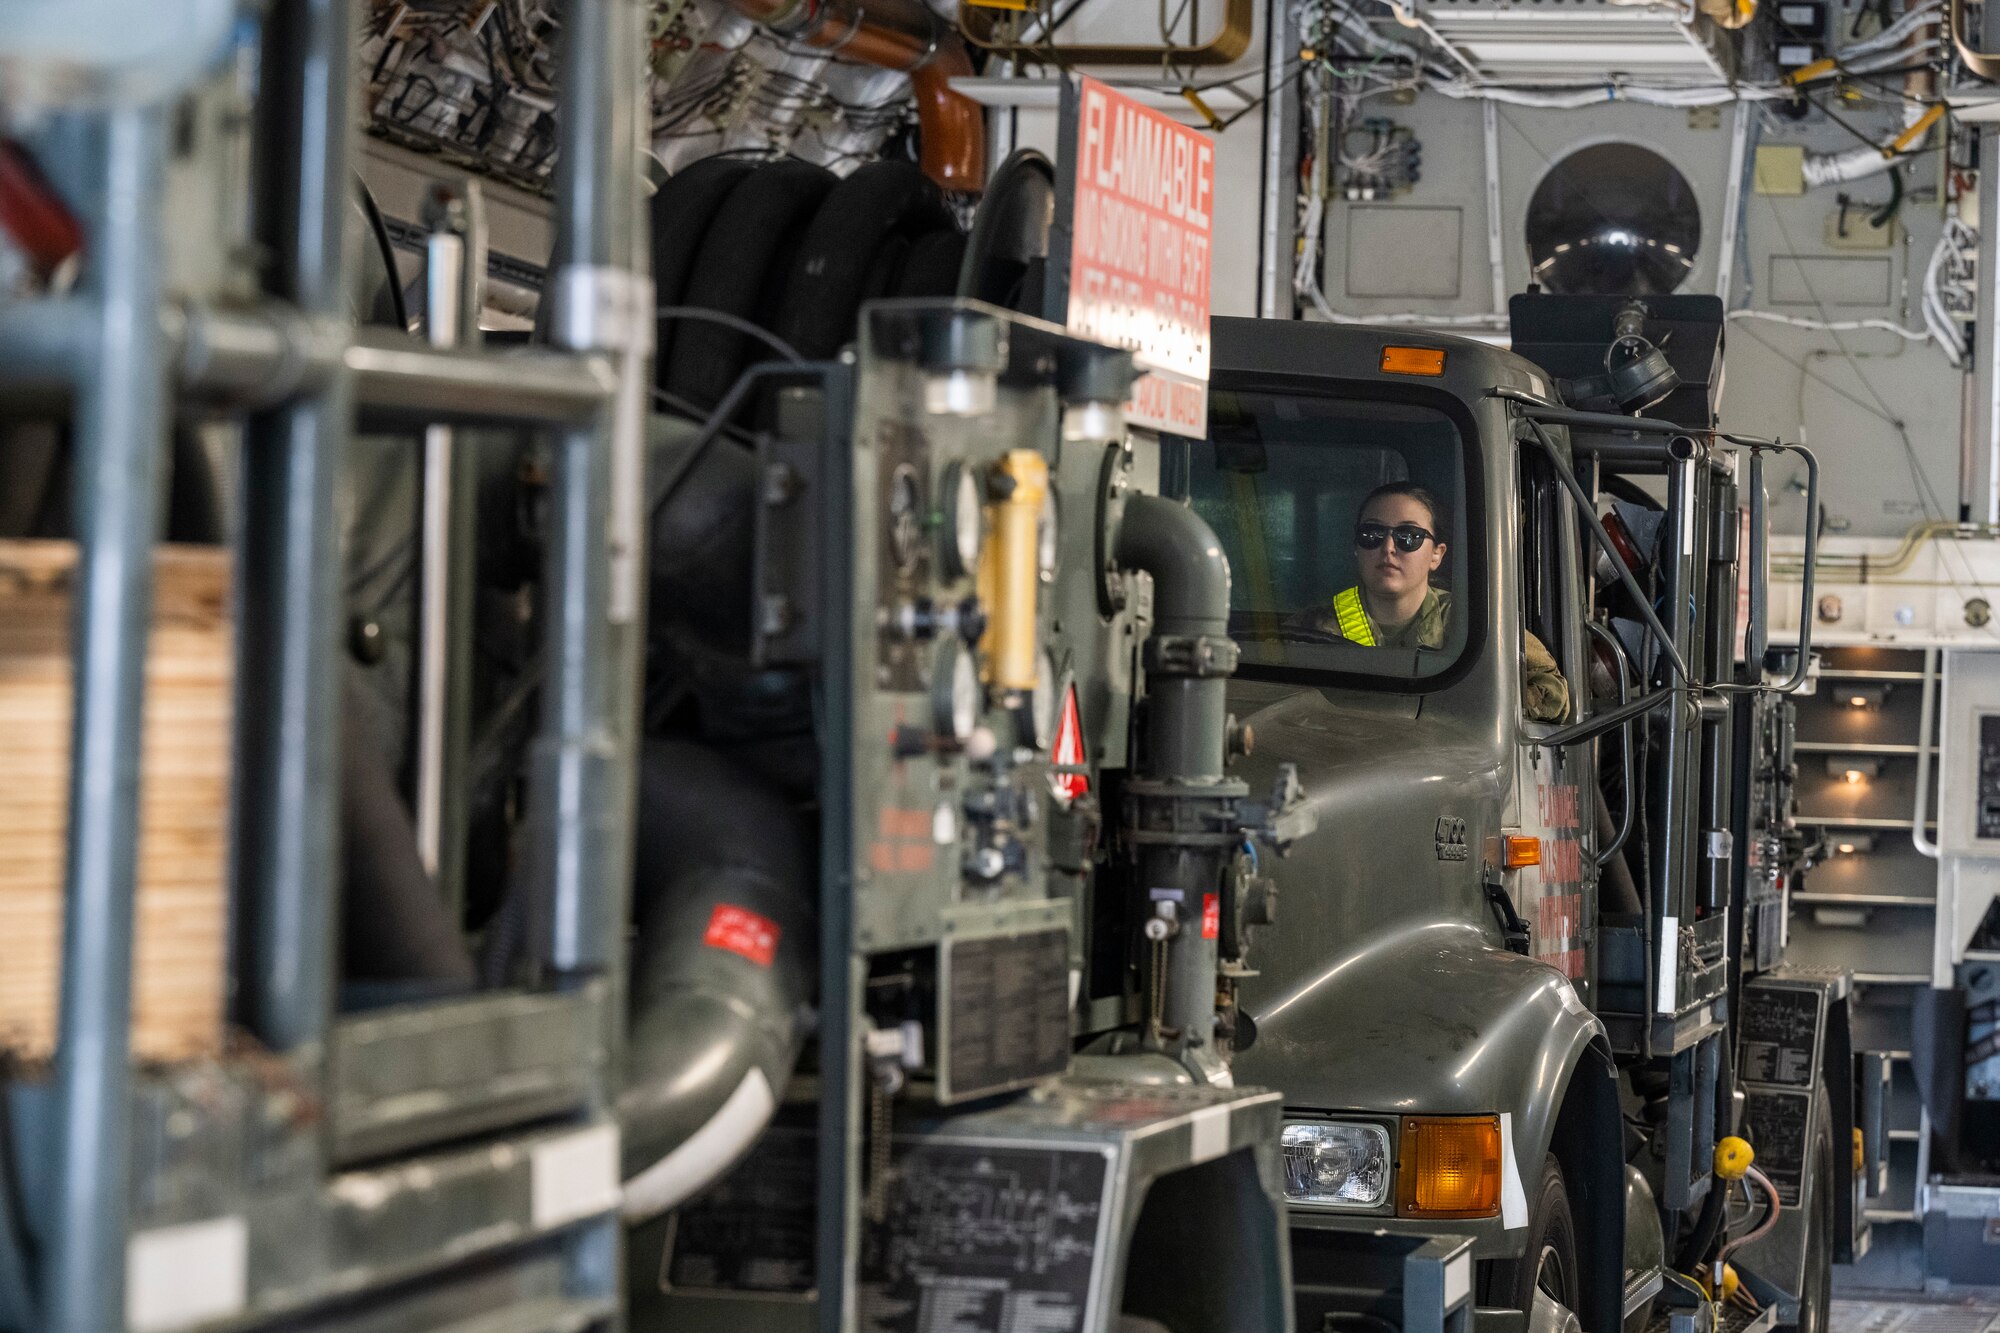 U.S. Air Force Airman 1st Class Molly Odovich, 509th Logistics Readiness Squadron fuels distribution operator, prepares to offload a fuel truck from a C-17 Globemaster at Royal Australian Air Force Base Amberley, Aus., March 22, 2022. Airmen from Whiteman Air Force Base, Missouri were in Australia to assist a B-2 training mission in support of Pacific Air Forces' training efforts with allies and partners in support of a free and open Indo-Pacific region. (U.S. Air Force photo by Tech. Sgt. Hailey Haux)